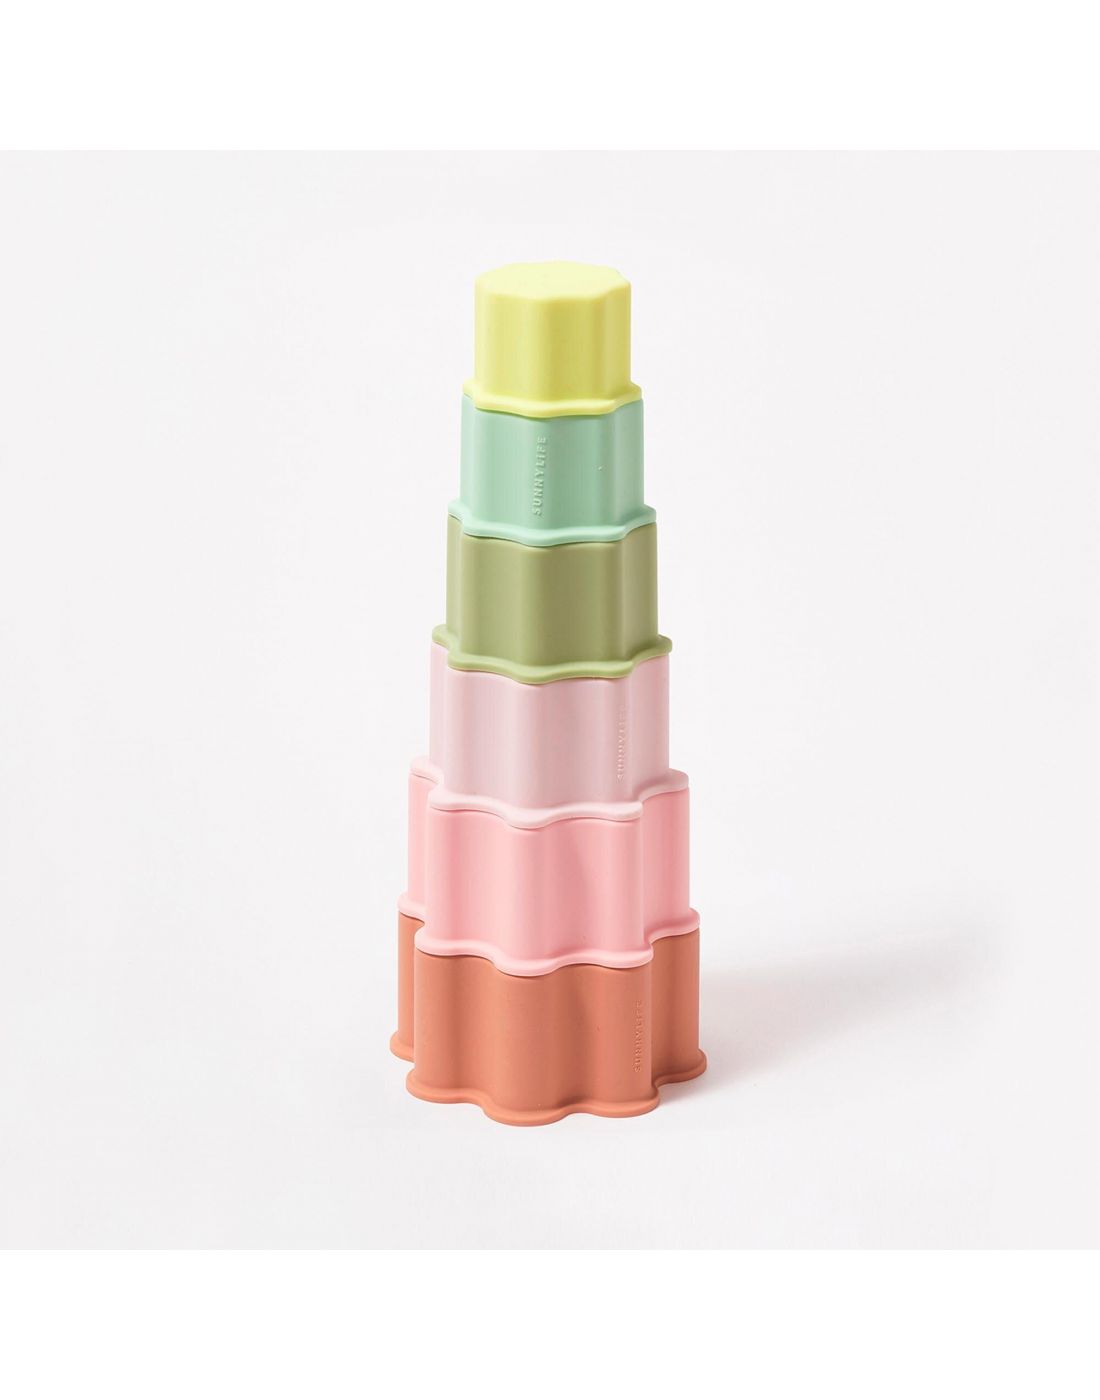 Sunny Life Silicone Stacking Tower
 Circus